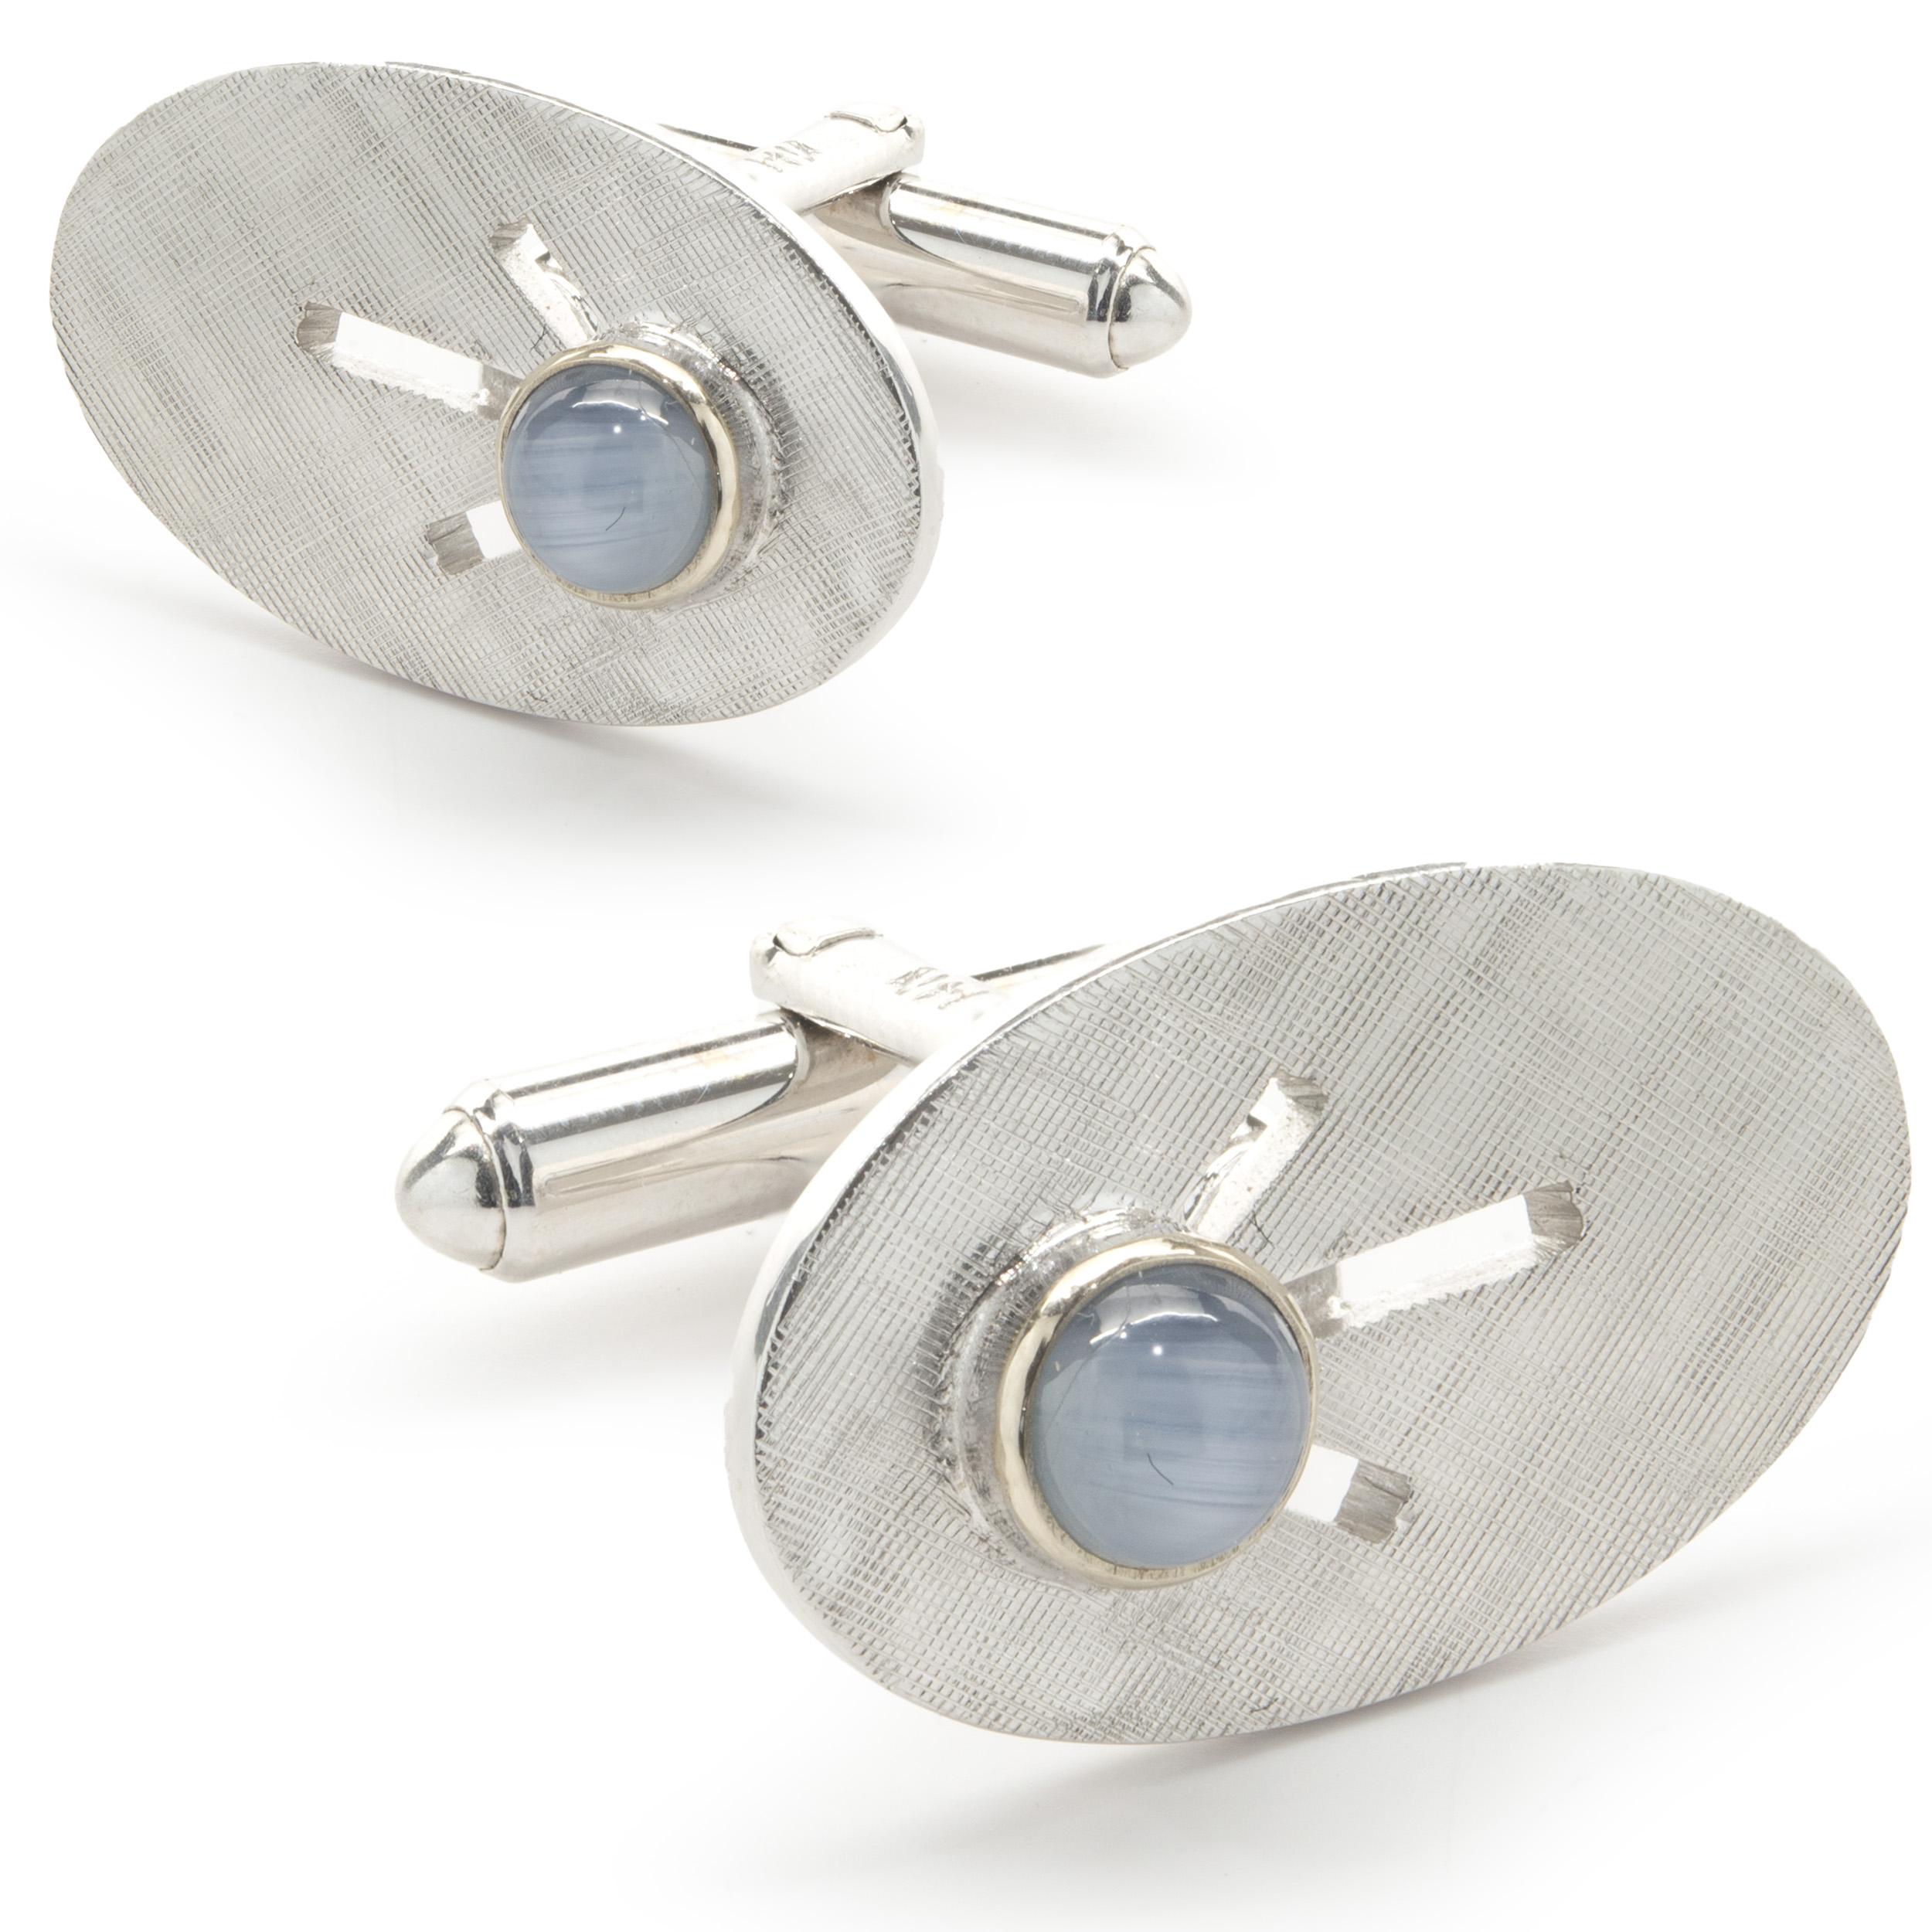 Material: 14K white gold
Dimensions: cufflinks measure 23.5 x 15mm 
Weight: 14.35 grams